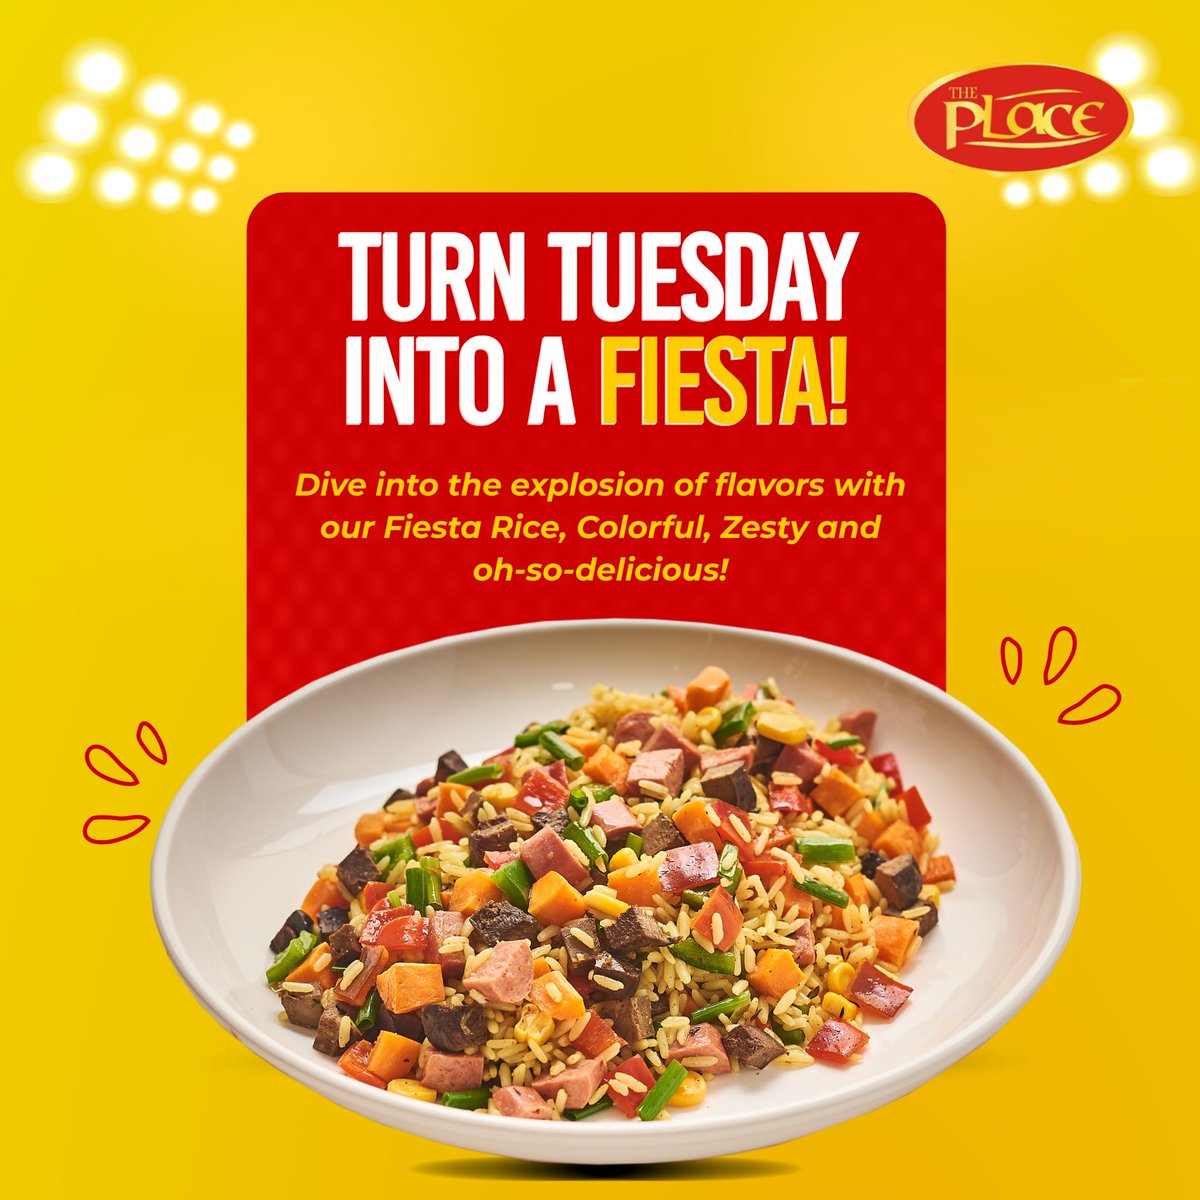 Turn Tuesday into a Fiesta! 🎉 Dive into an explosion of flavors with our Fiesta Rice - it's colorful, zesty, and oh-so-delicious! 

Spice up your day with a taste of excitement! 🔥

 #FiestaTuesday #FlavorExplosion #NigerianFood
#foodie #nigerianfood #grilledchicken #naijafood